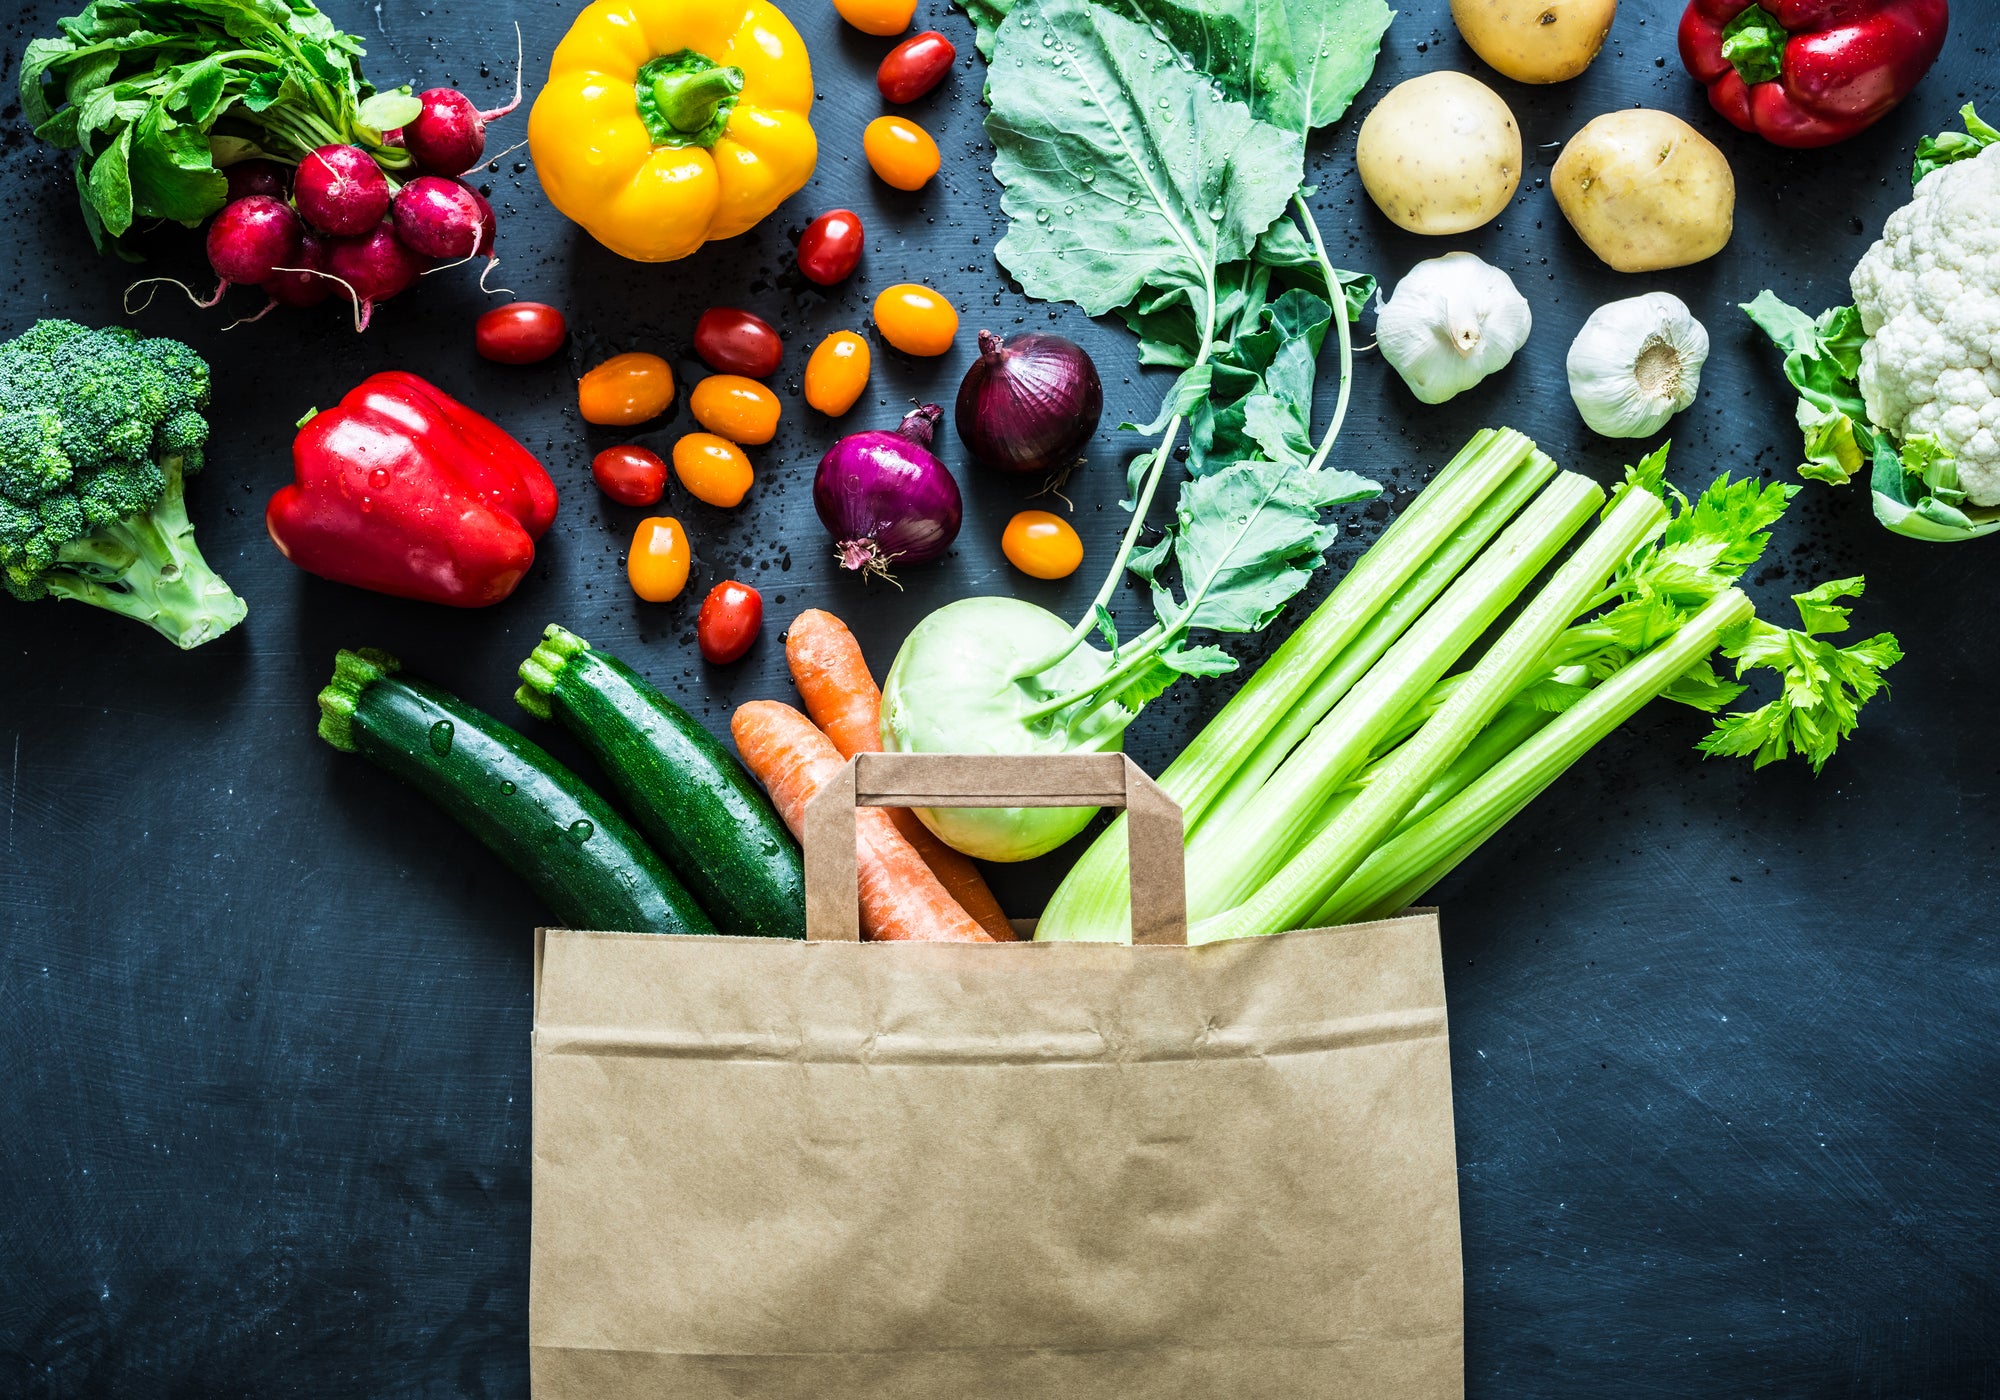 Same-day grocery delivery app Buymie raises €5.8m for UK expansion